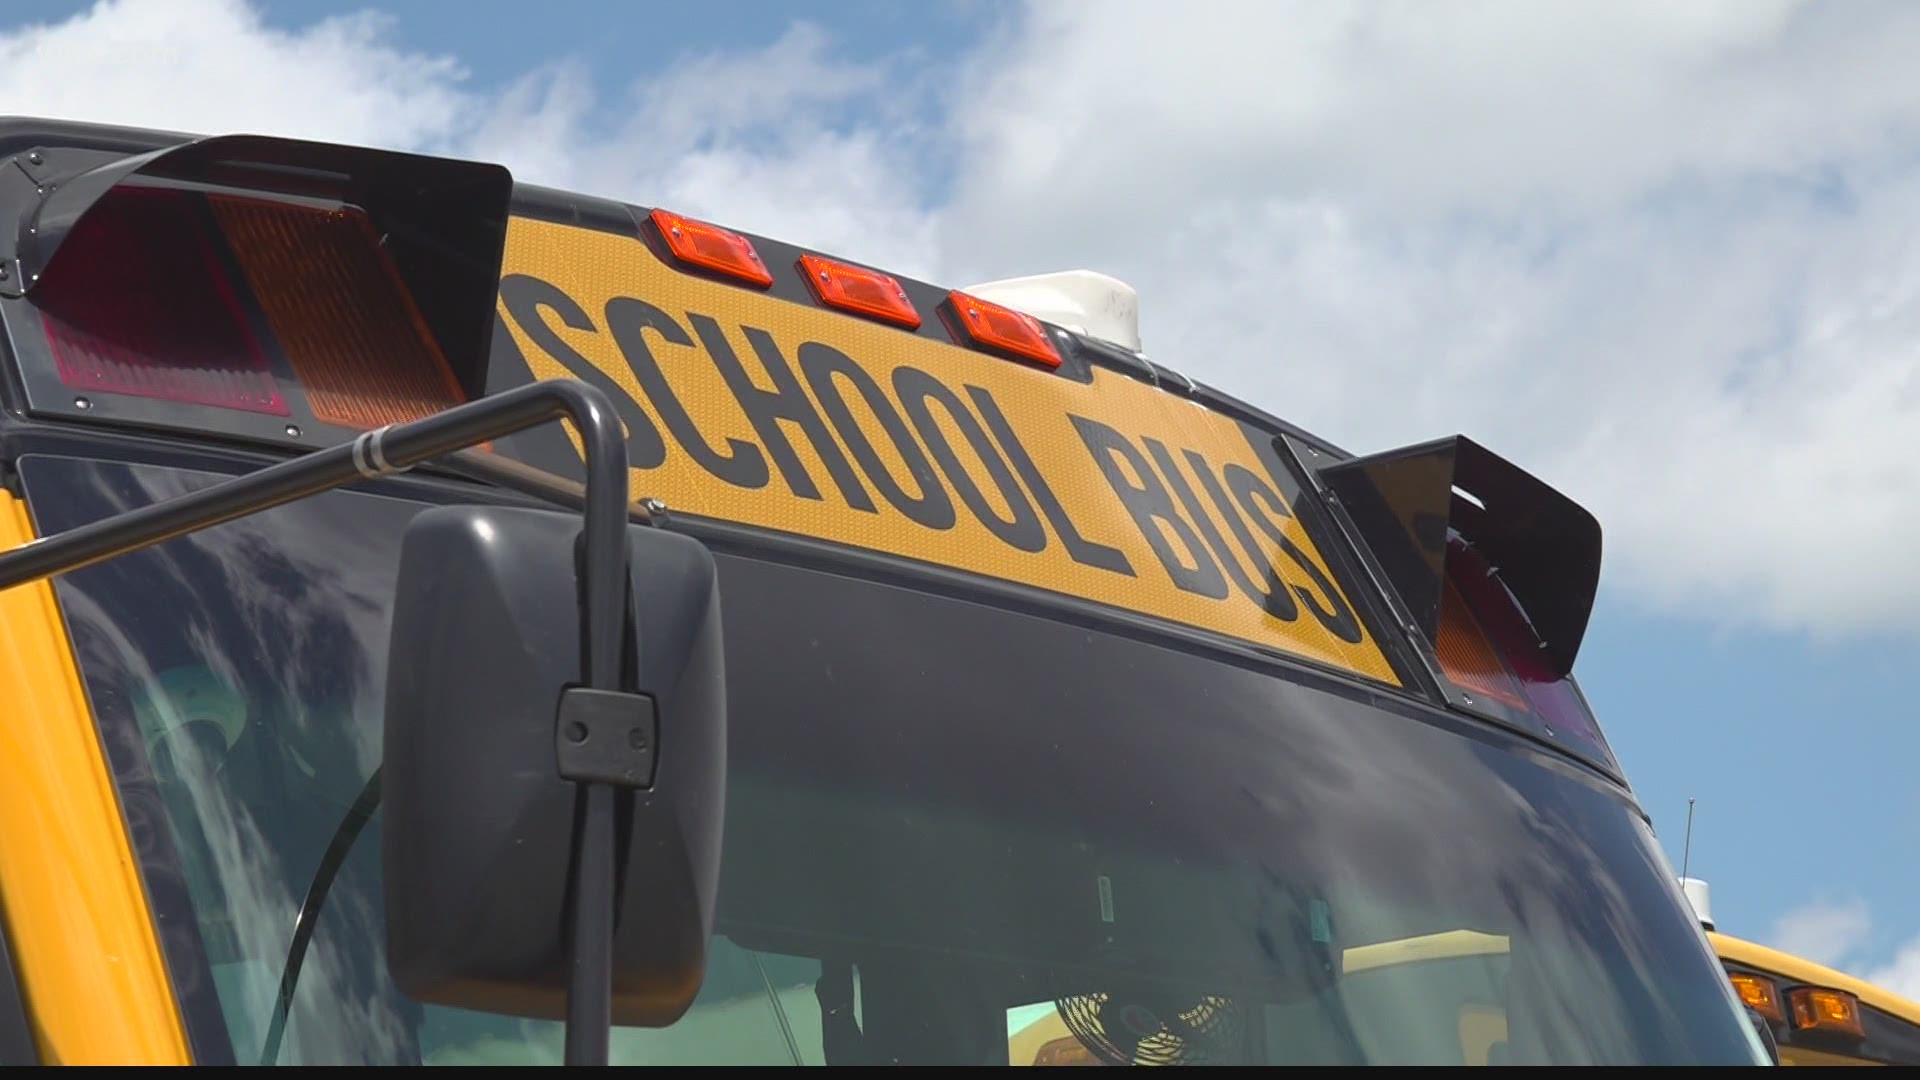 School districts say that bus drivers are taught safety training for events just like these.